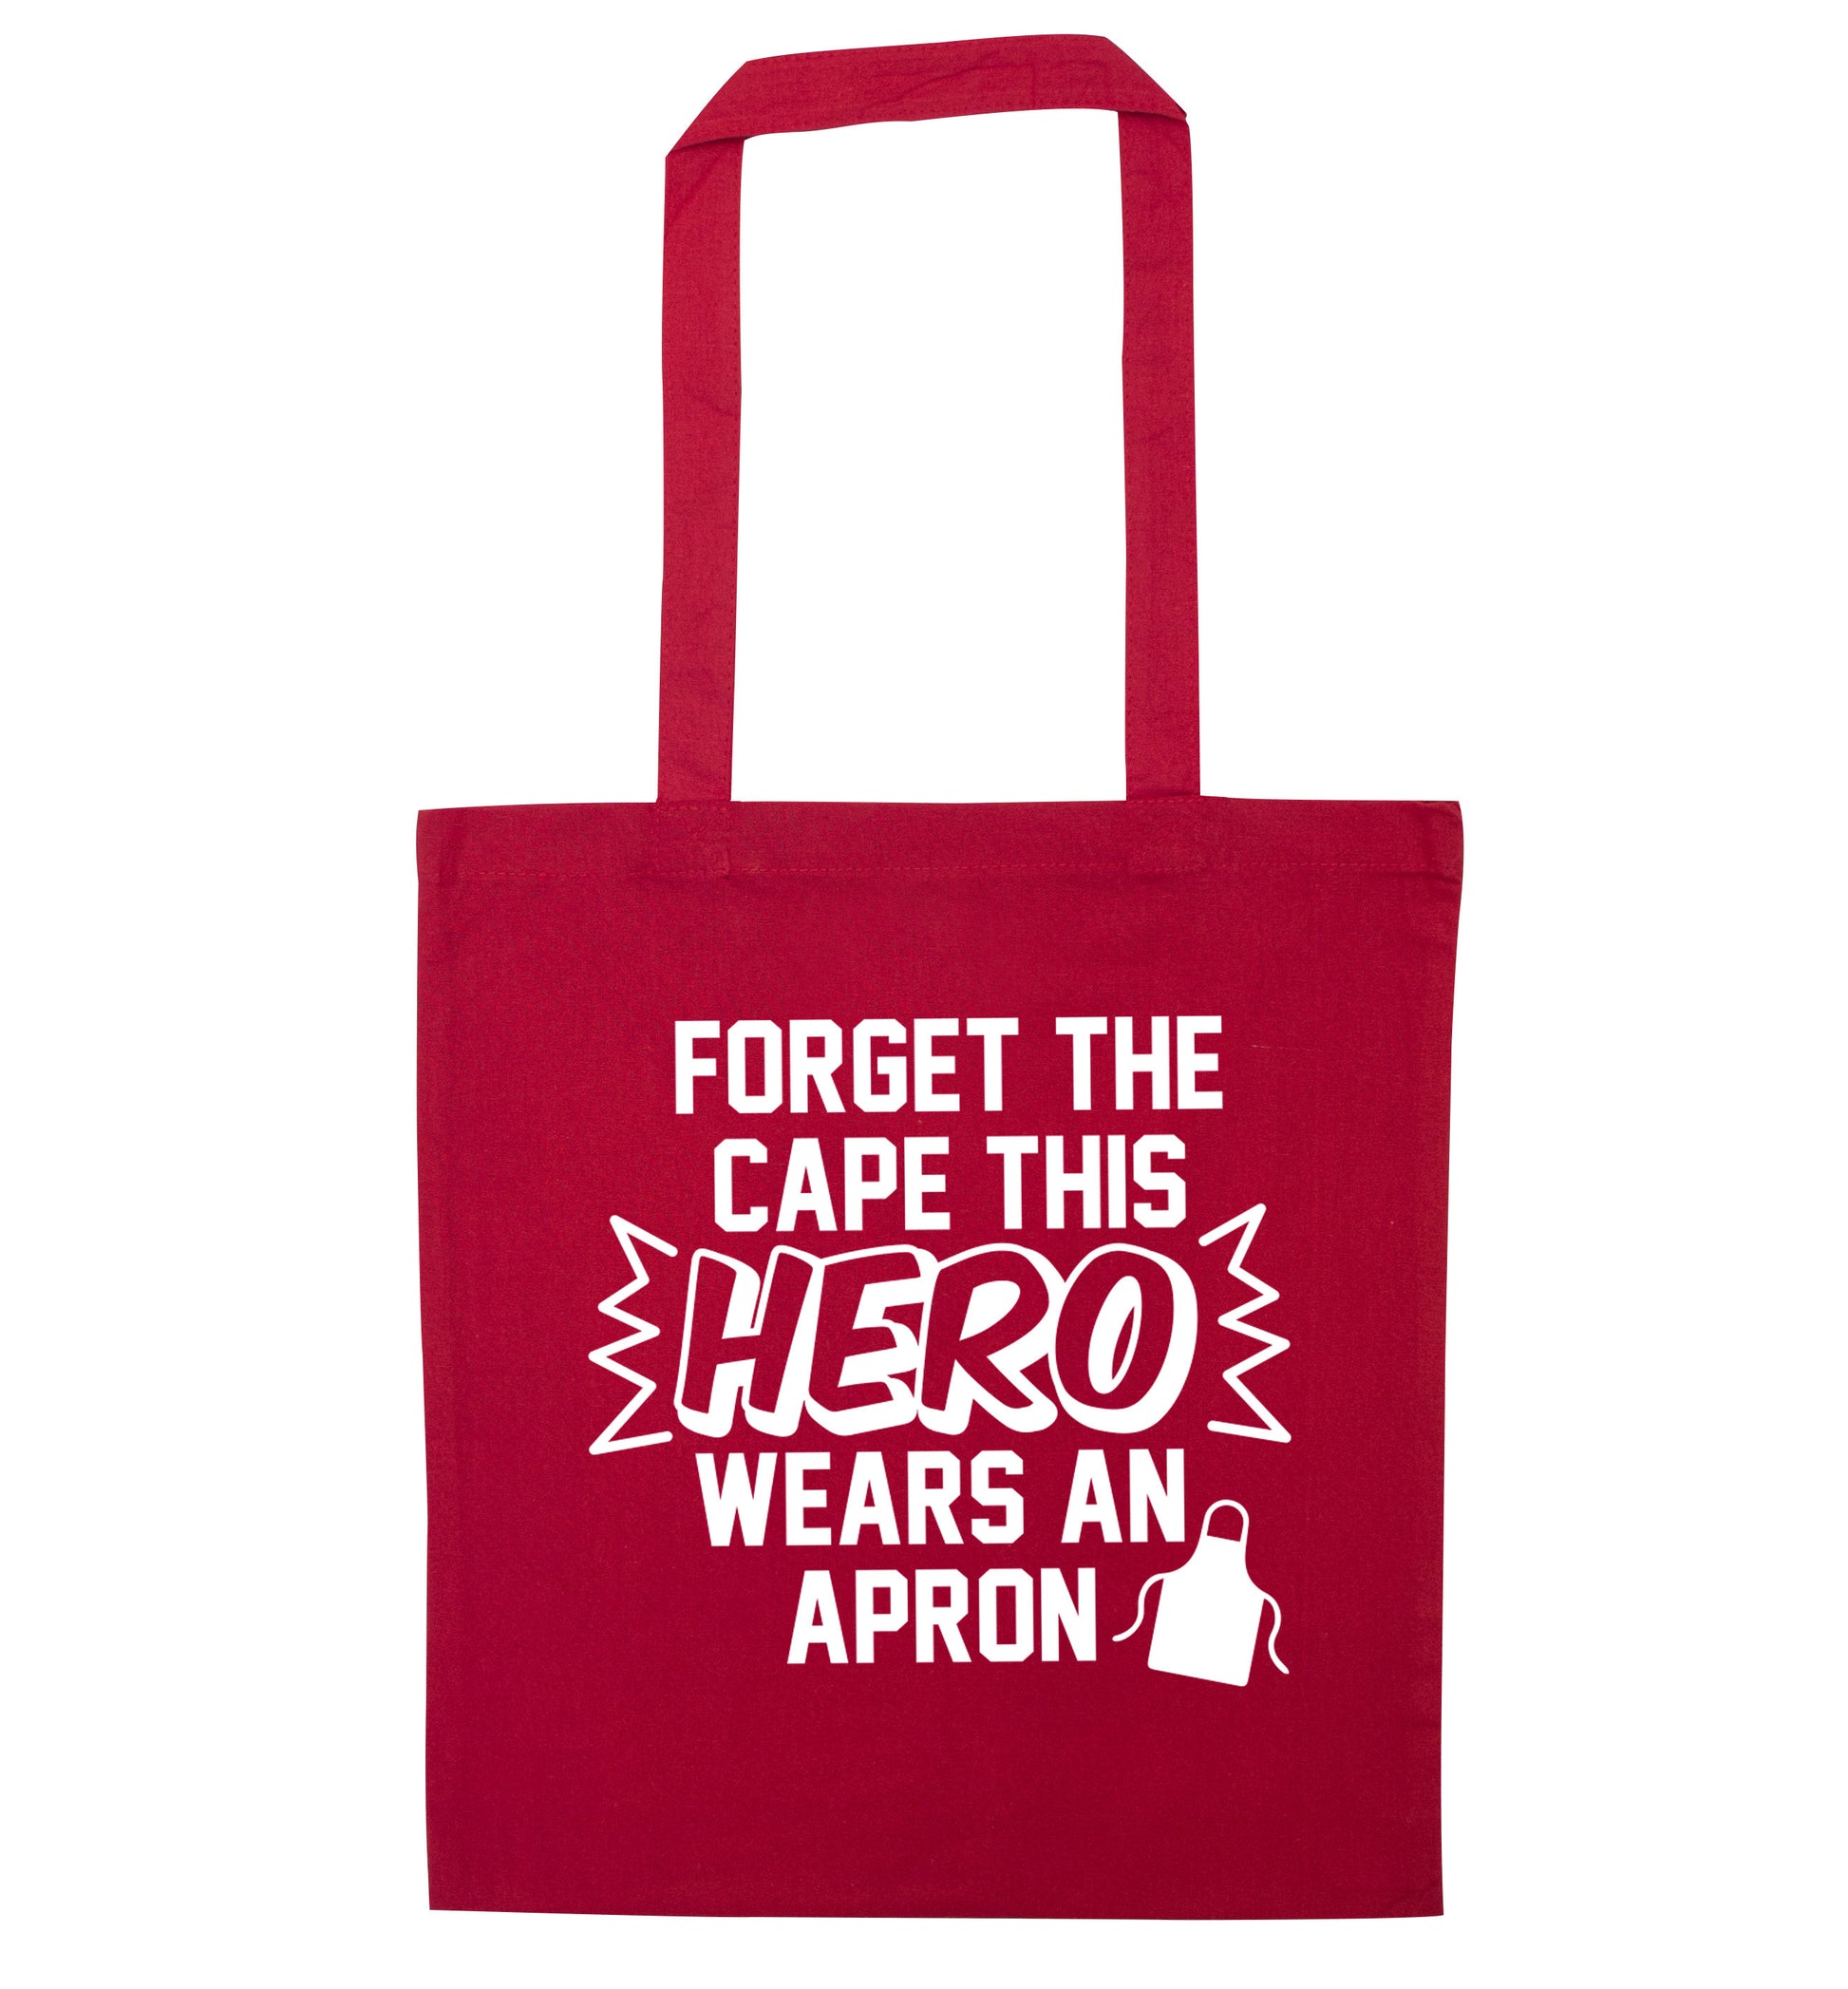 Forget the cape this hero wears an apron red tote bag